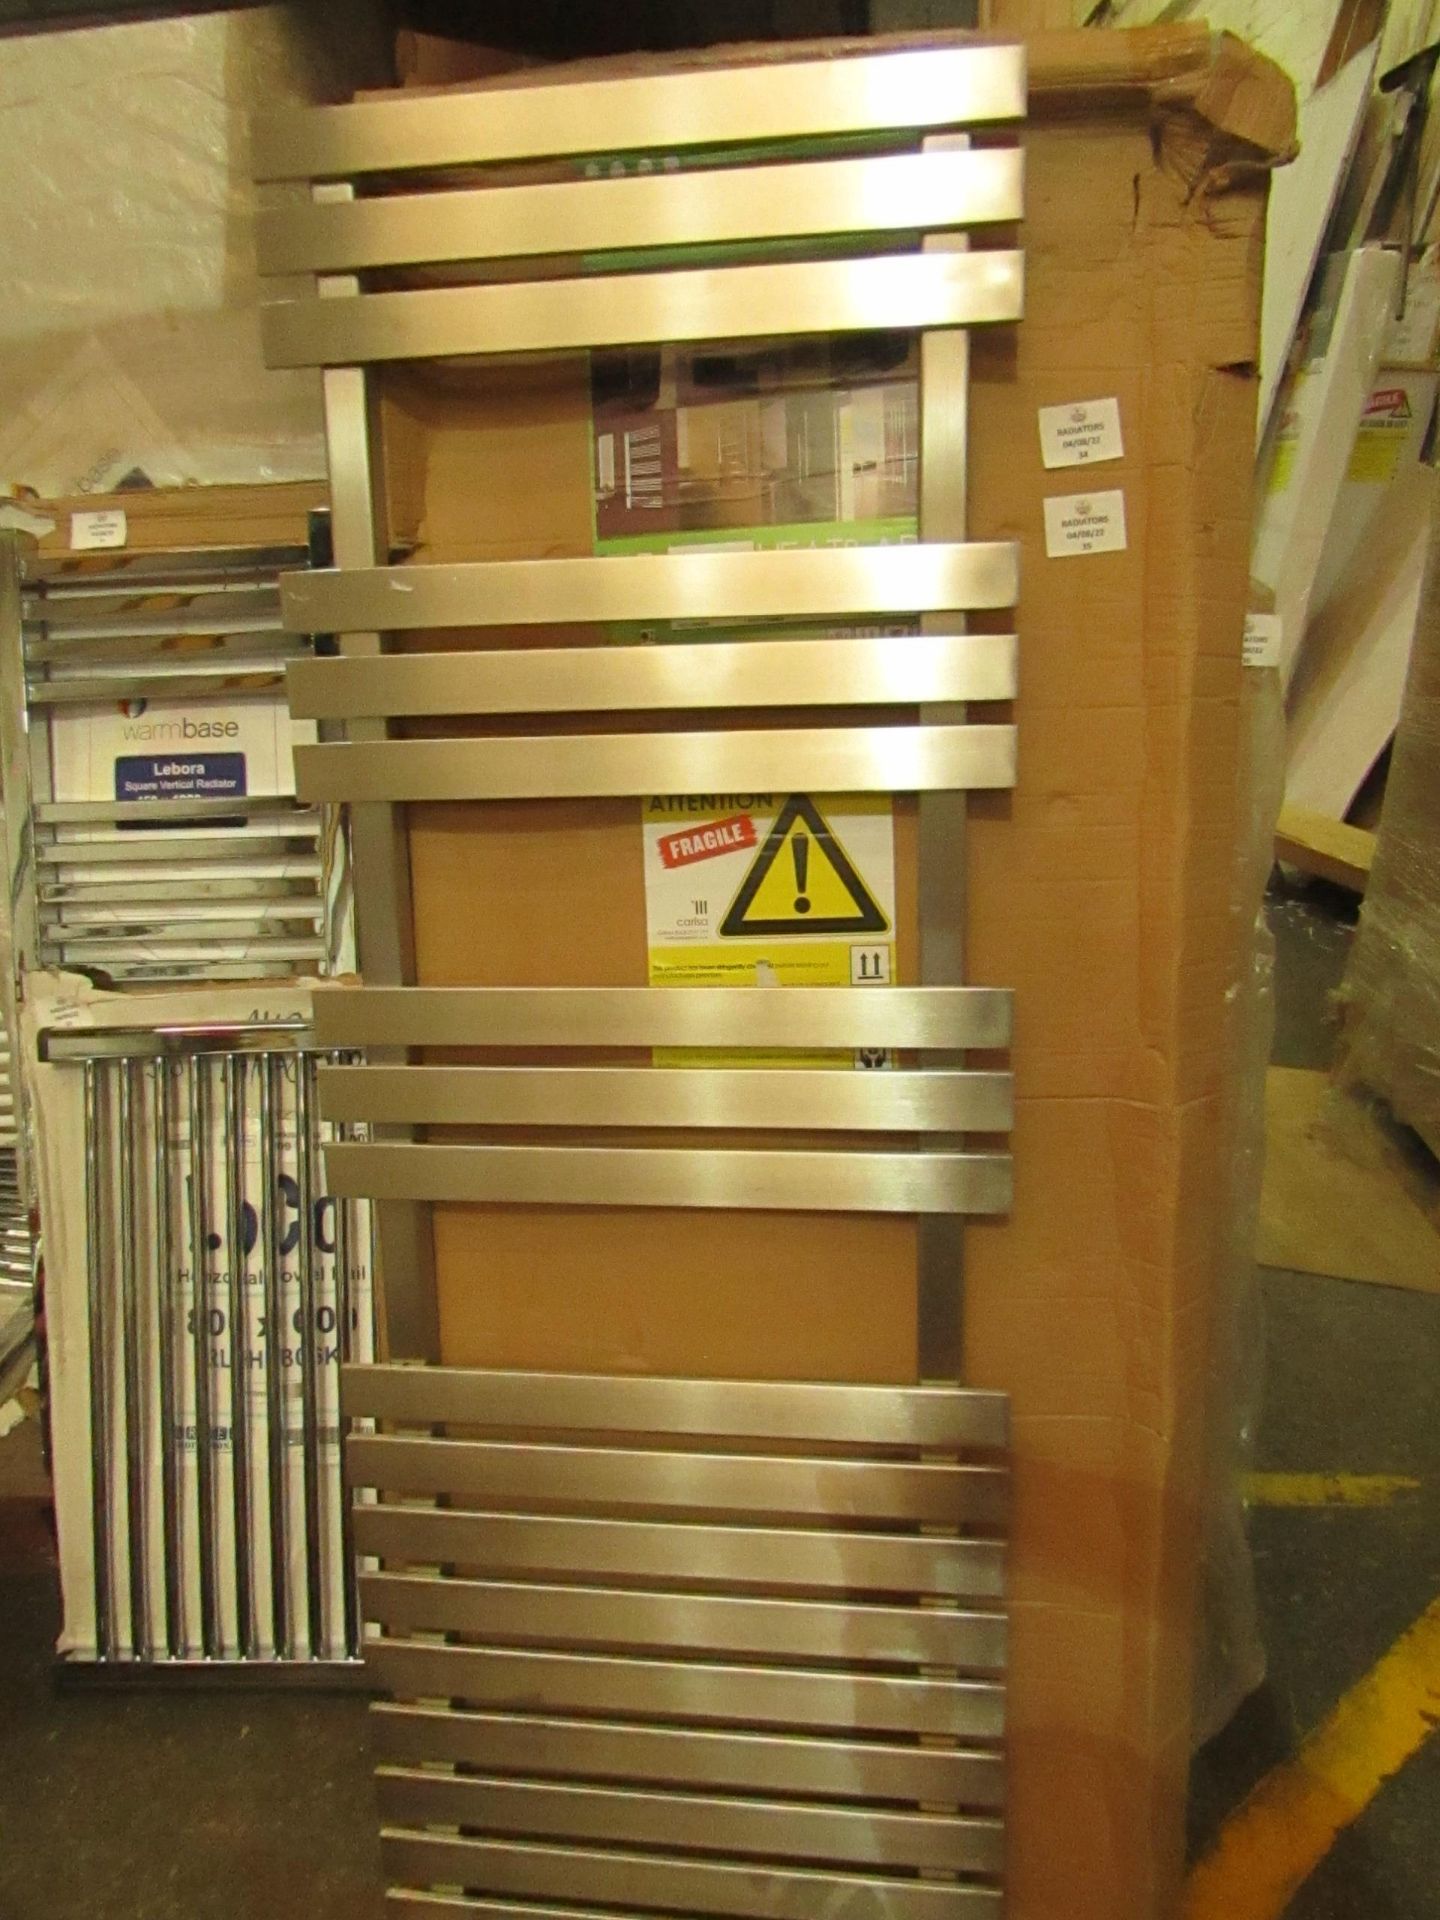 Carisa - Sahara Towel Radiator - 600x1660mm - Item Appears to be in Good Condition & Boxed.